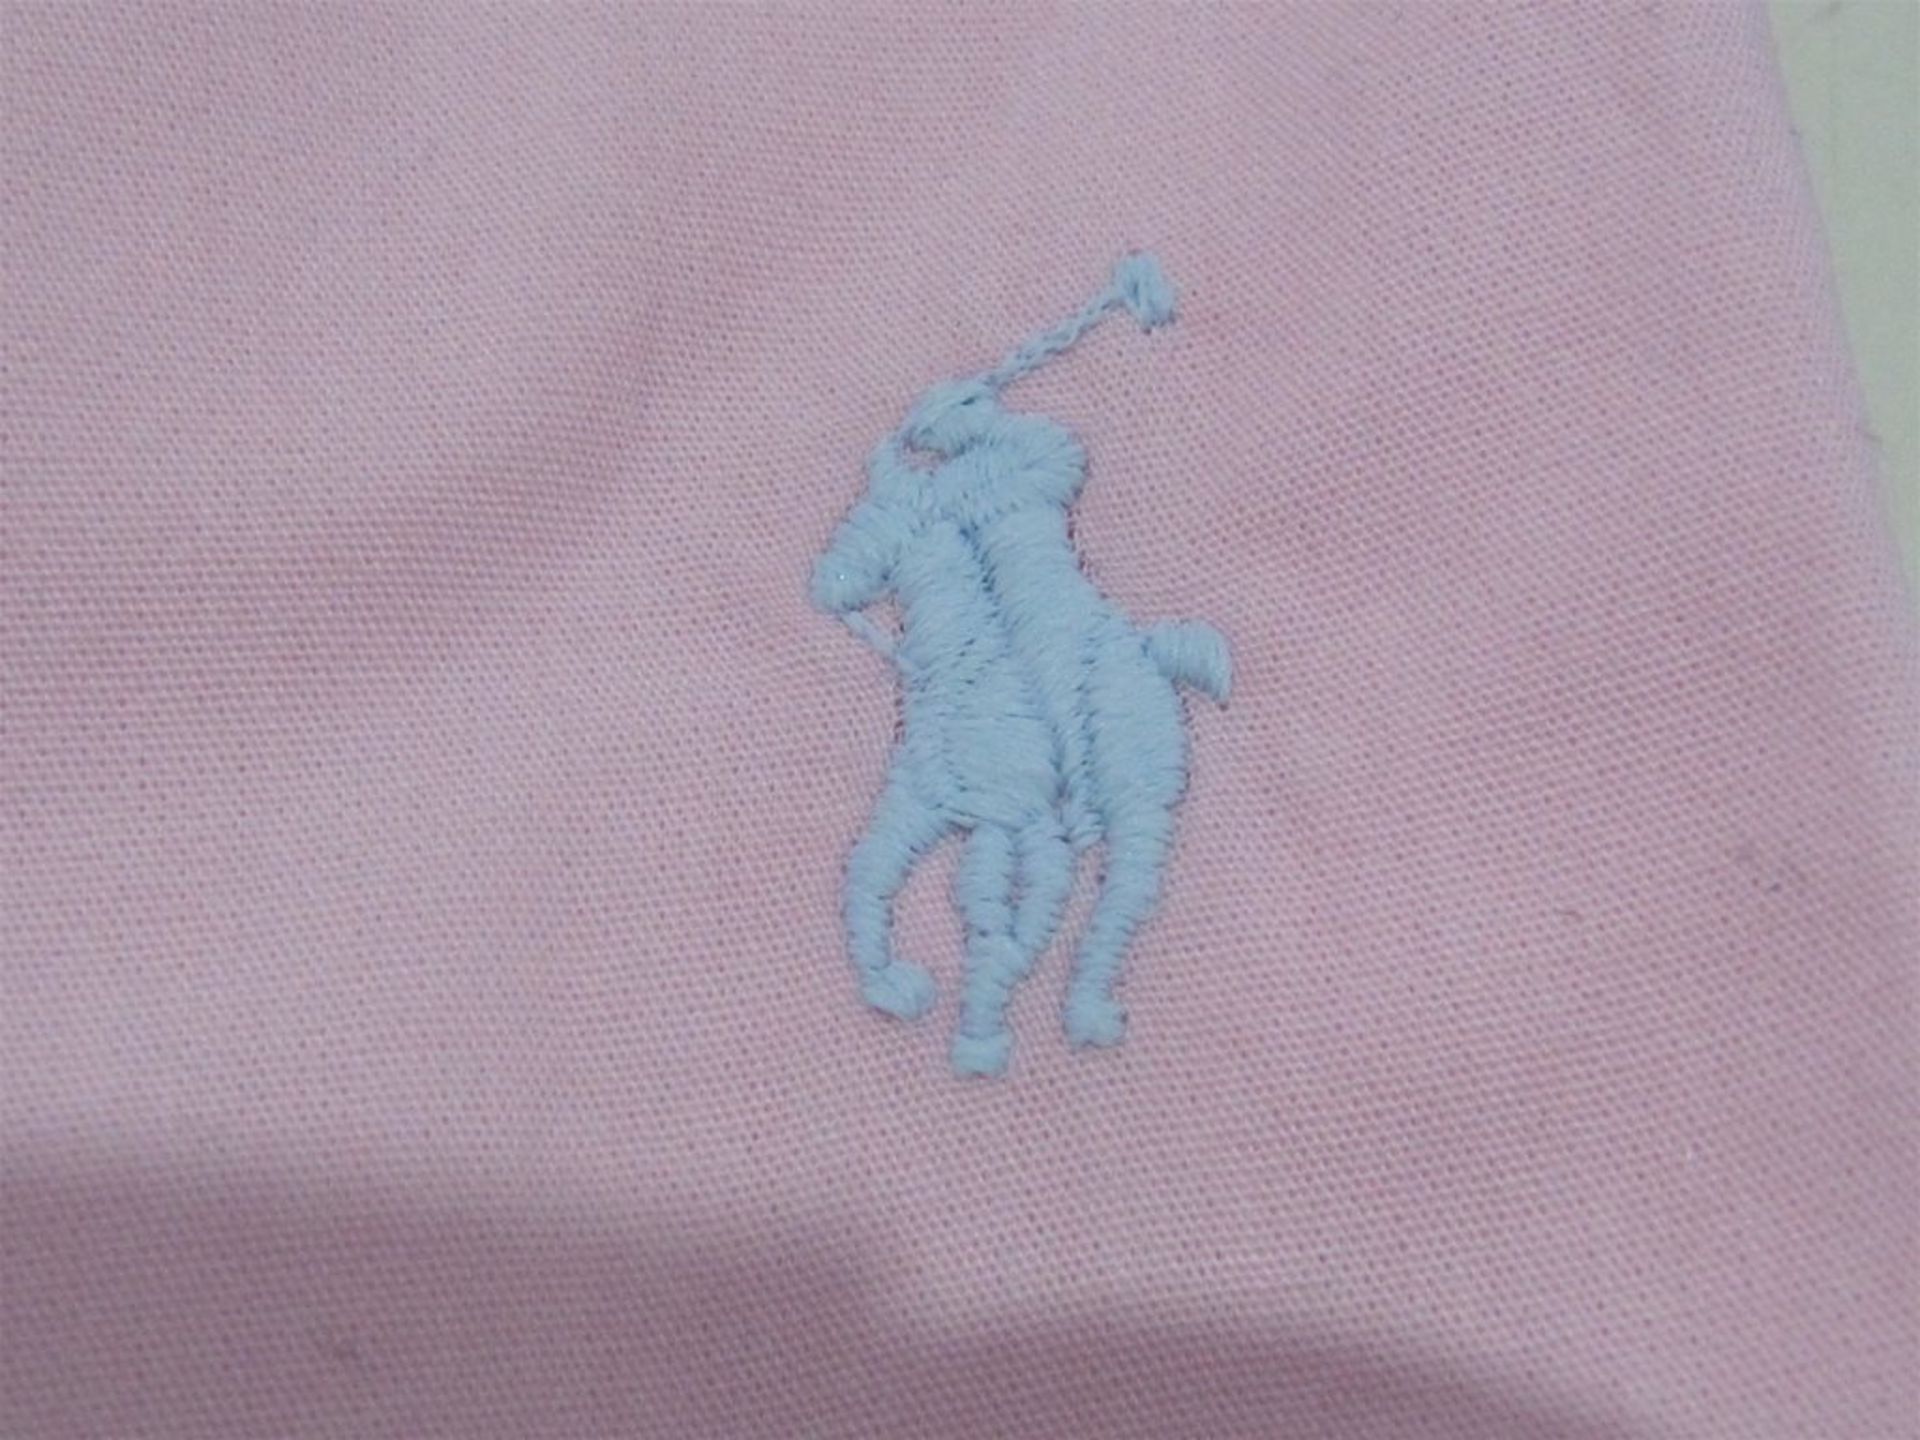 Ralph Lauren Shirt. Pink. Free Shipping when you Win 2 Lots or more. - Image 2 of 2